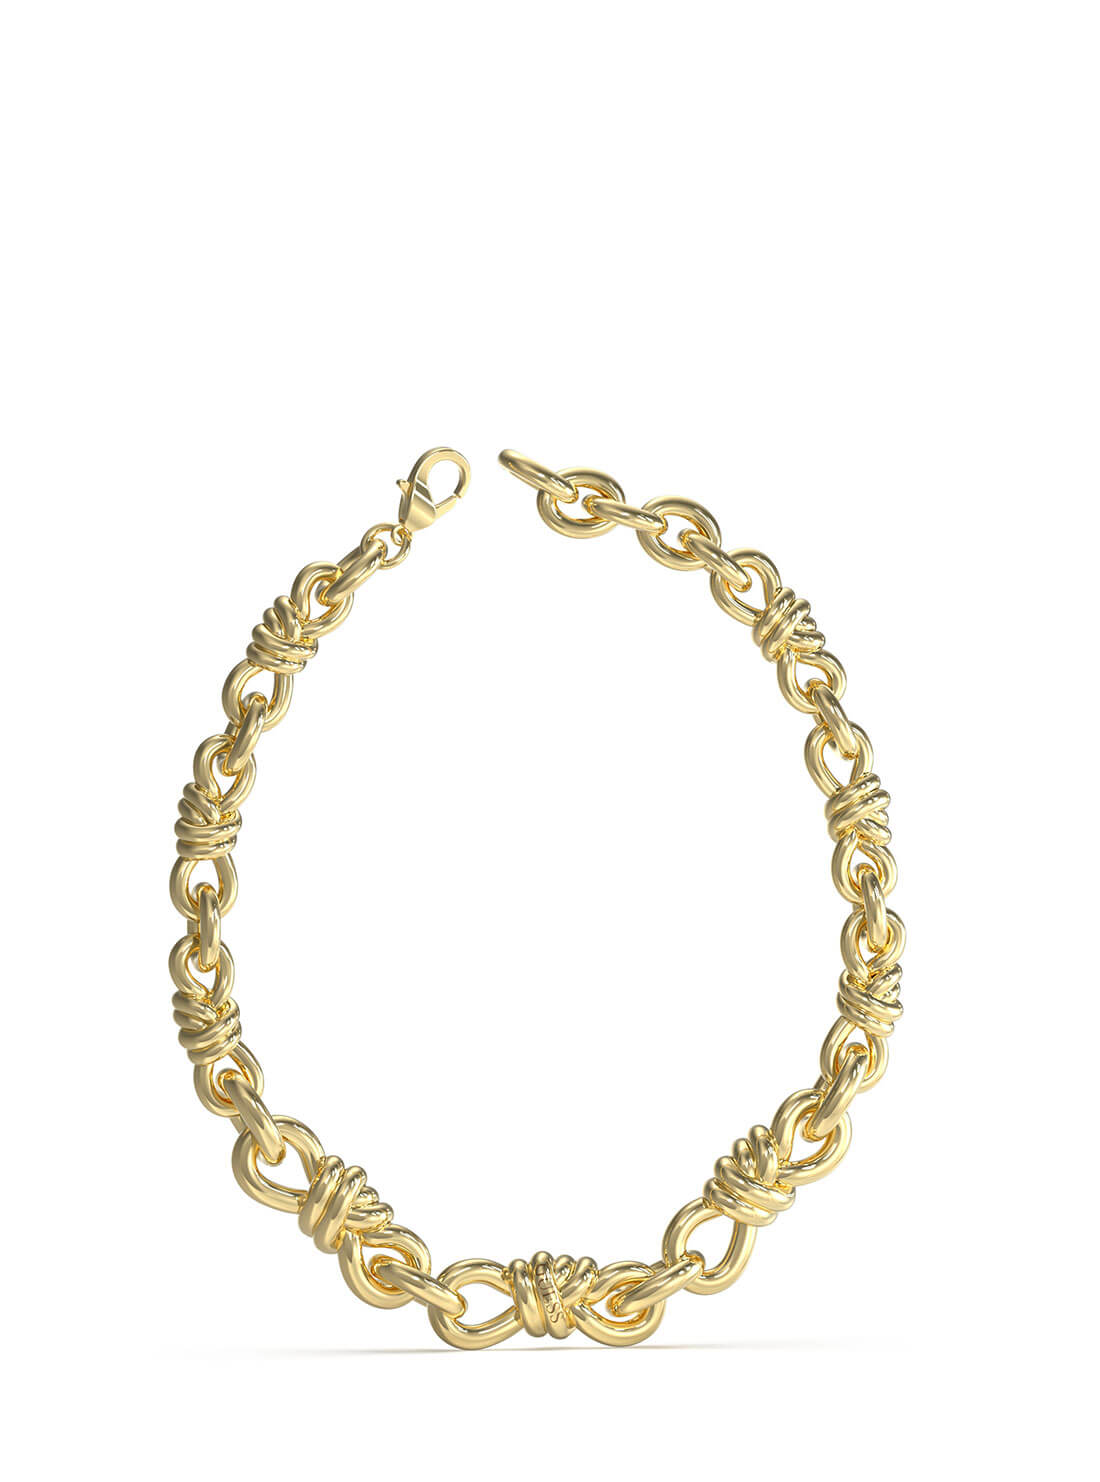 Gold Modern Love Knot Necklace | GUESS Women's Jewellery | Front view